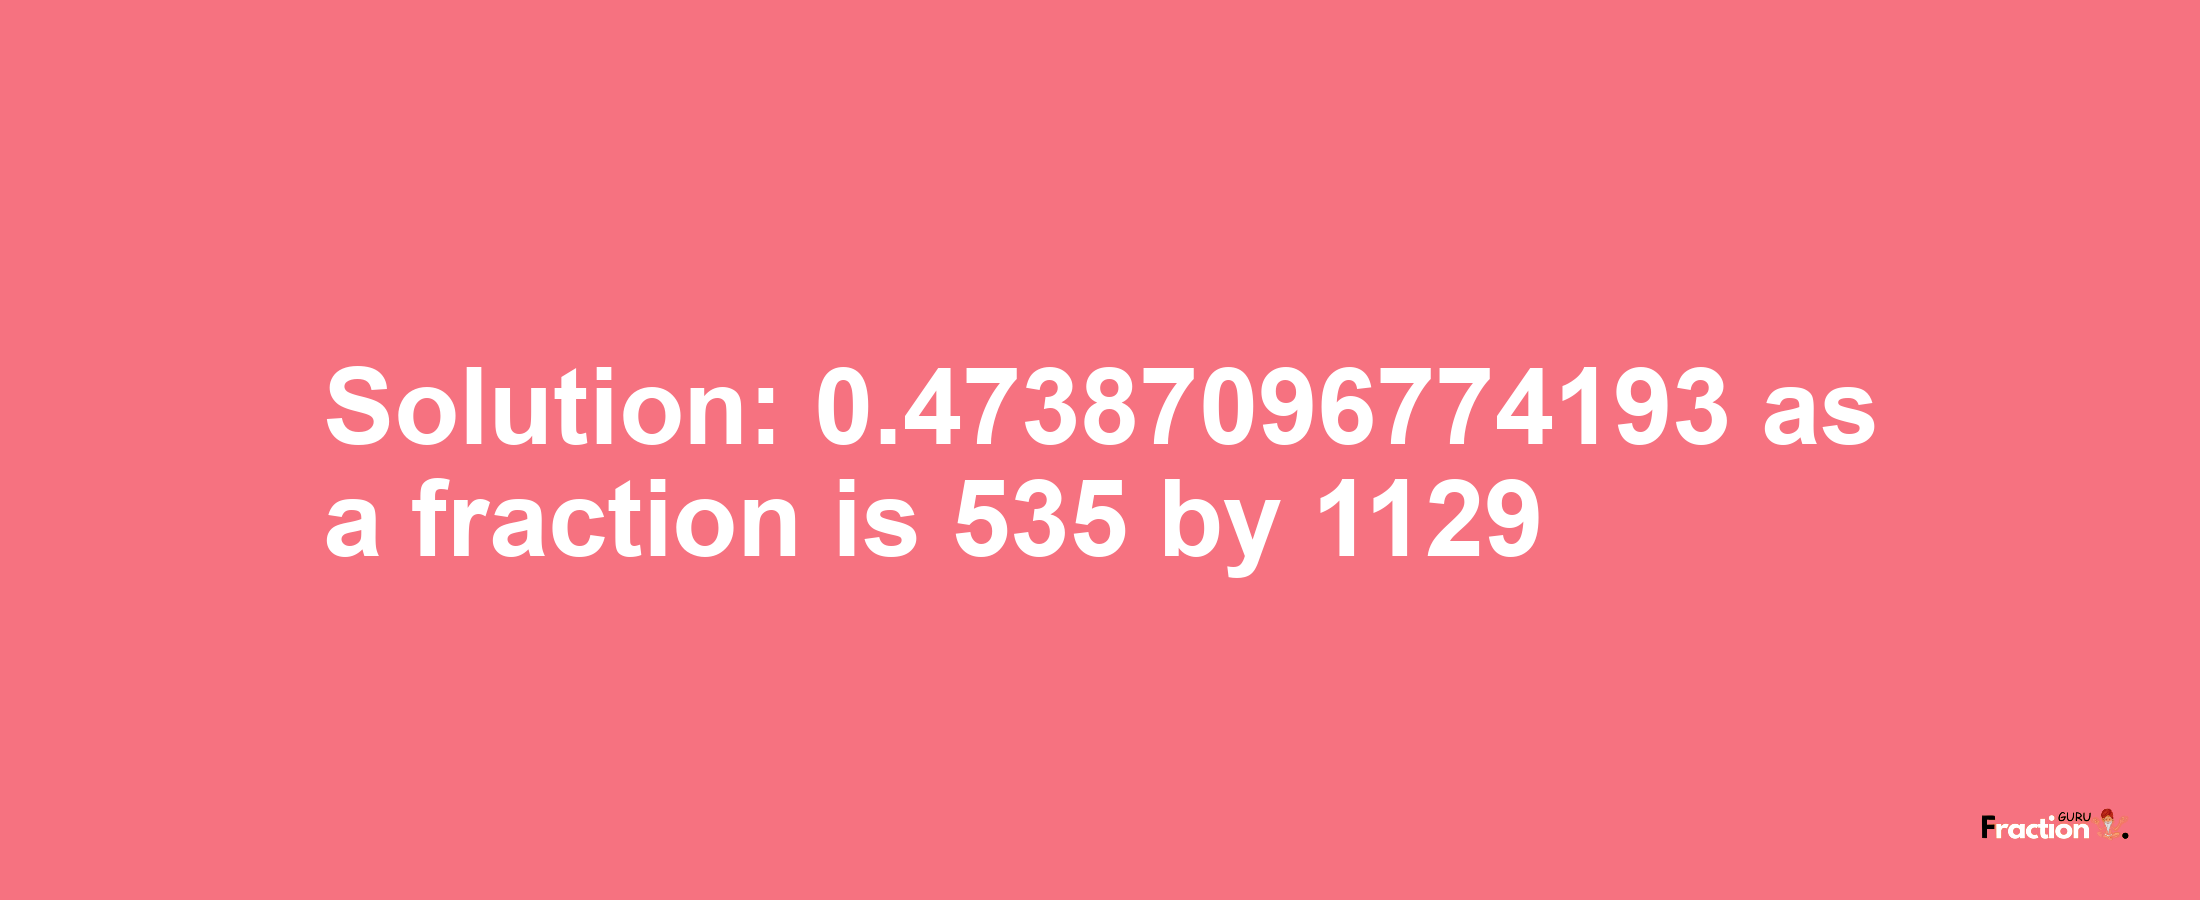 Solution:0.47387096774193 as a fraction is 535/1129